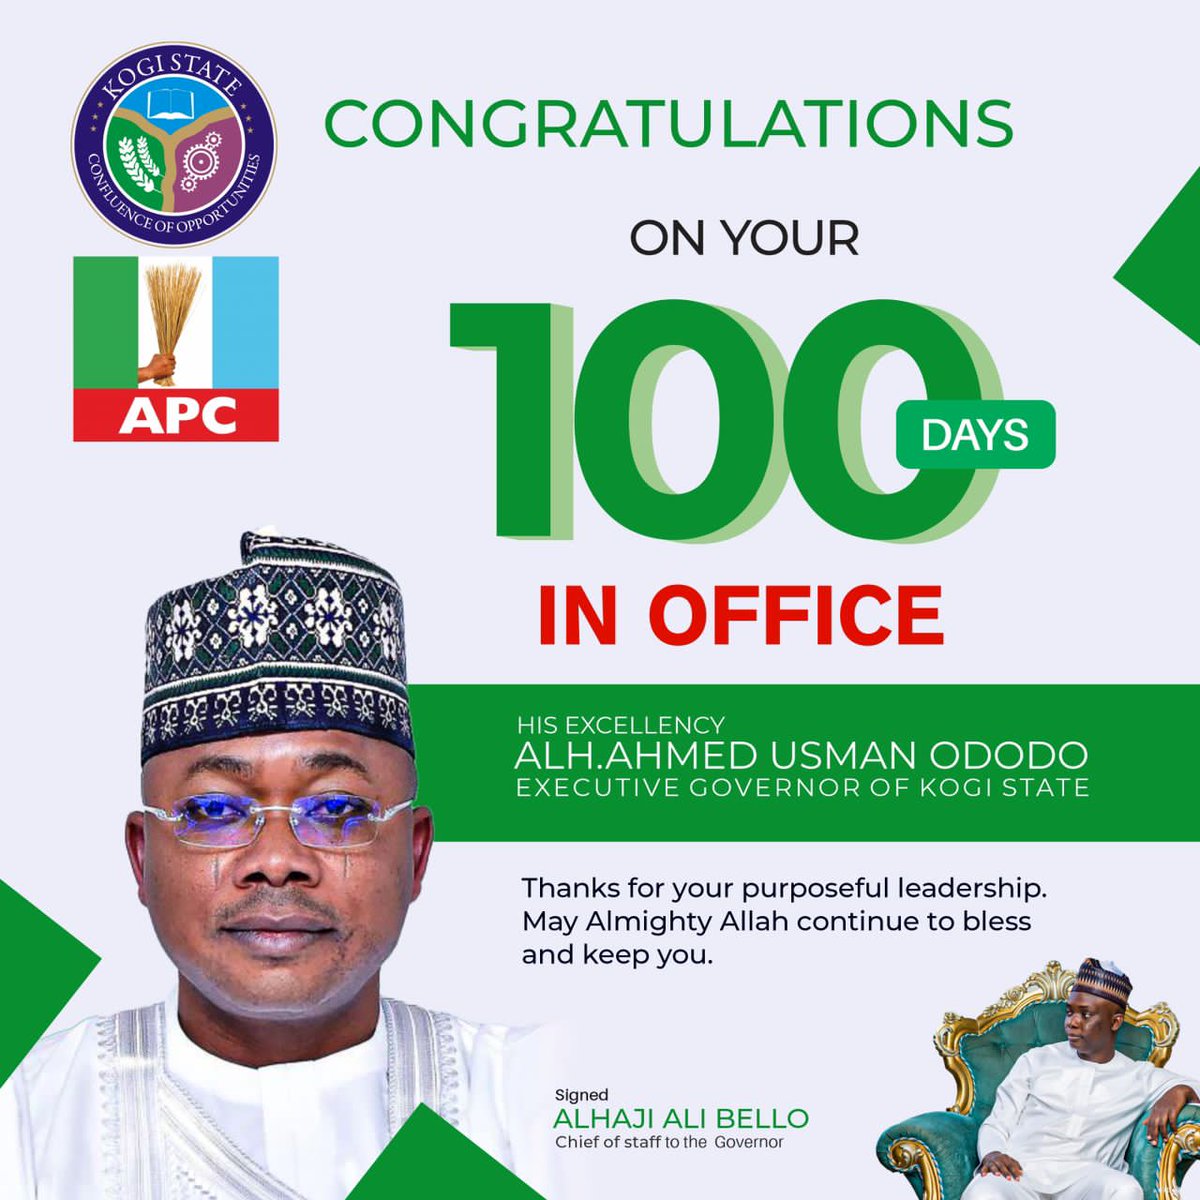 Thanks for the purposeful leadership may Almighty Allah continue to bless and keep you stronger for the progressive development of Kogi State.

Chief of Staff to the Gov, Alhaji Ali Bello facilitate with Gov Ahmed Usman Ododo on his 100 days in office.
#ododoisworking